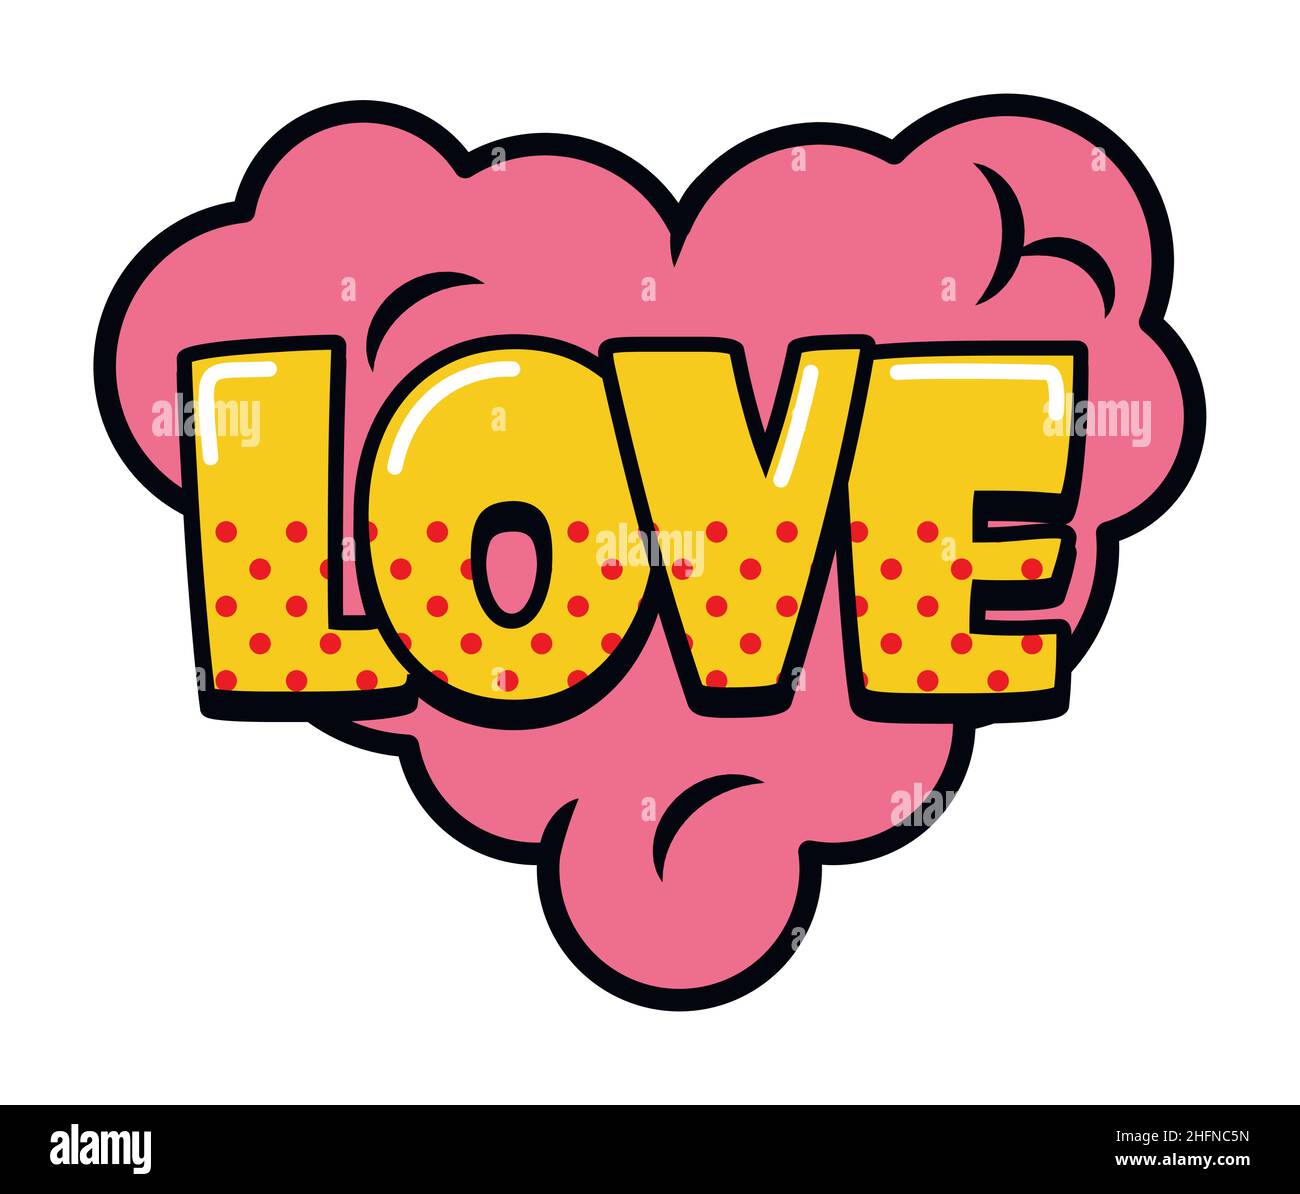 Love speech bubble in retro style. Vector illustration isolated on white background Stock Vector